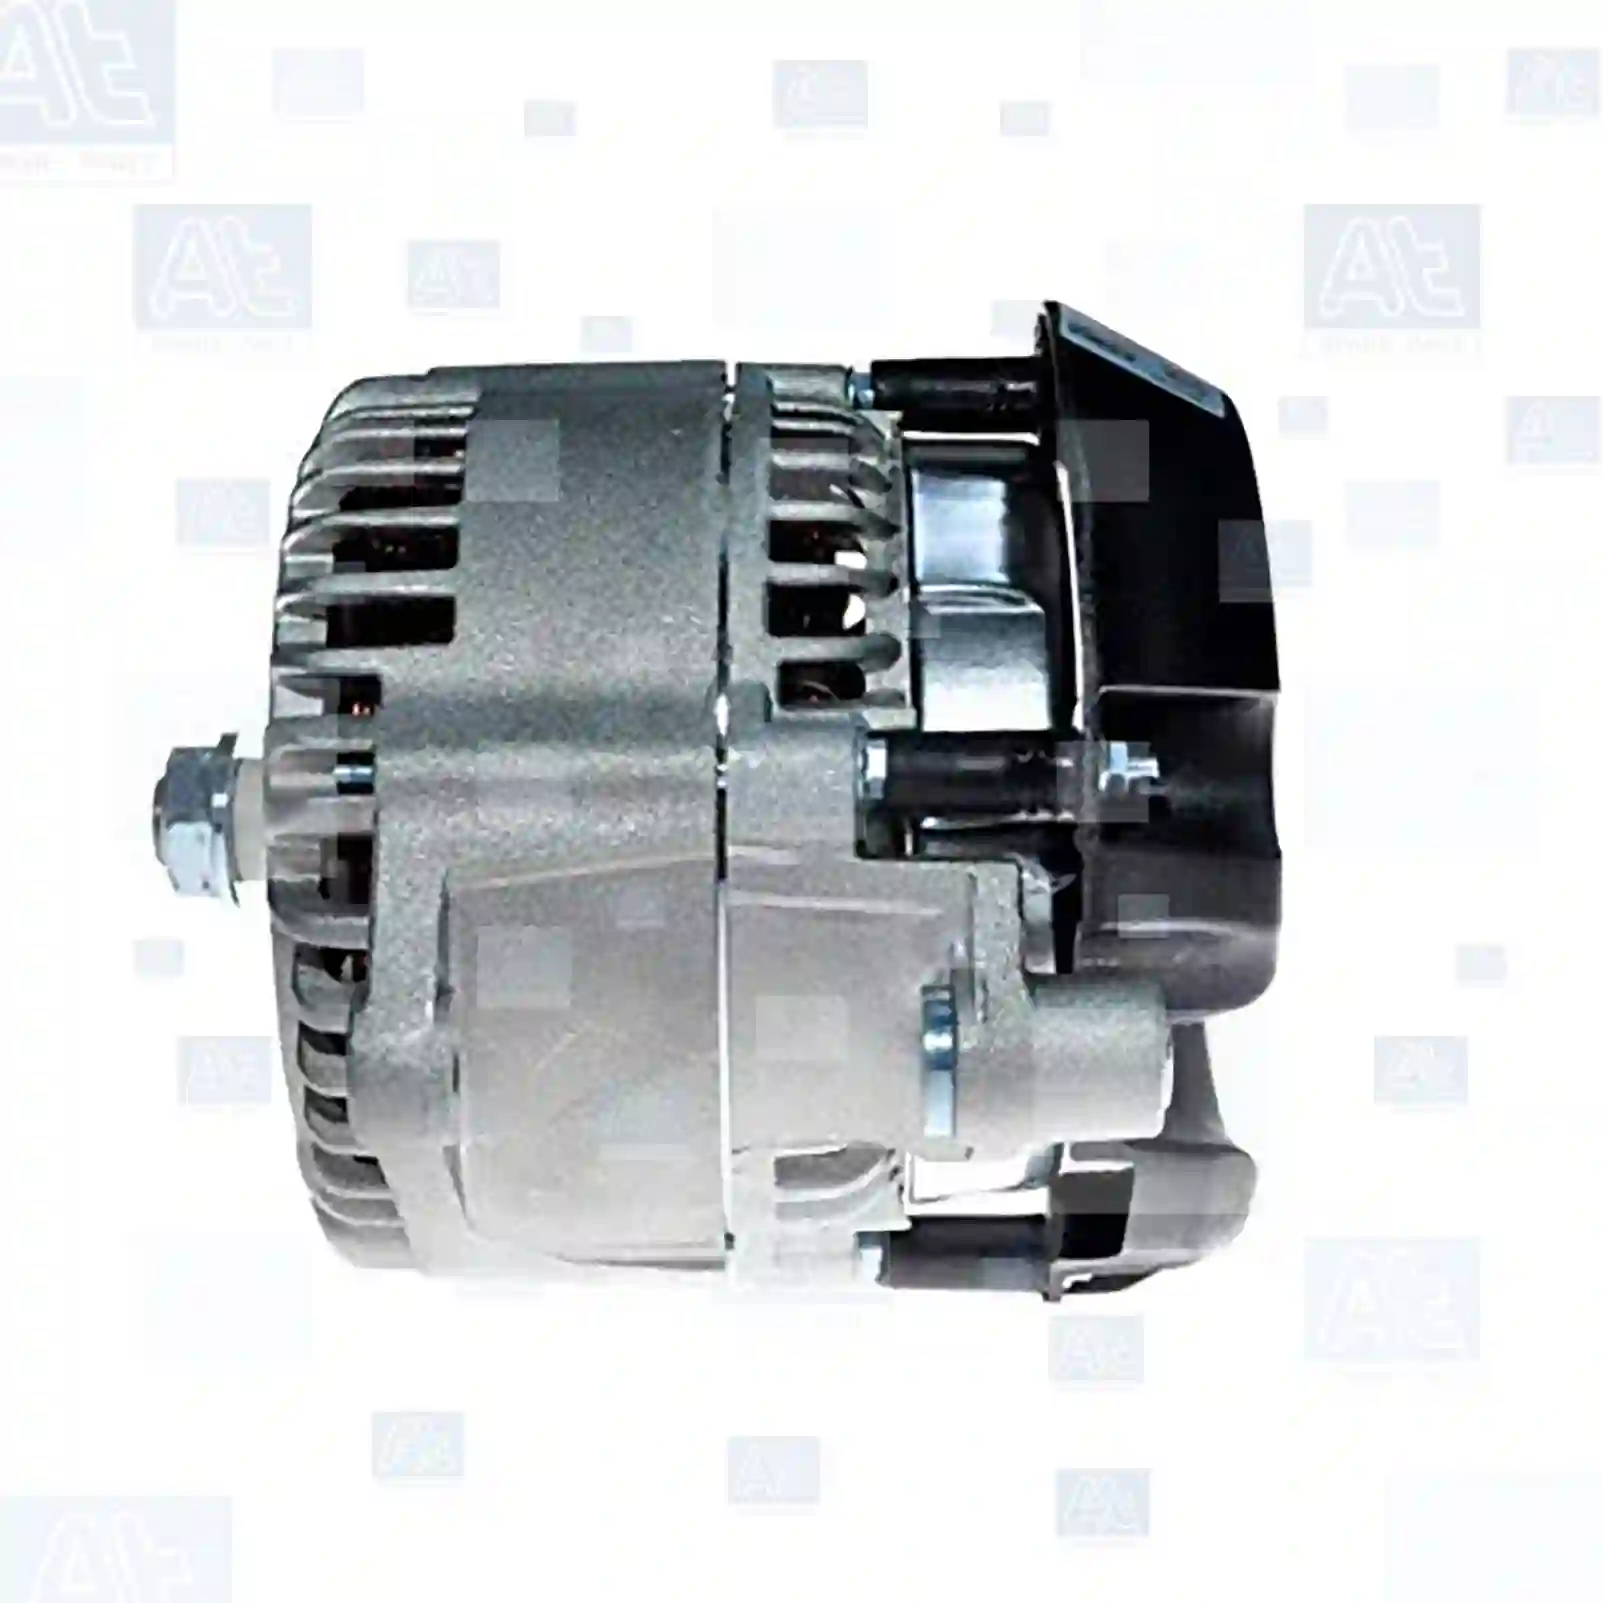 Alternator, at no 77711236, oem no: 1229421, 1376671, 1376672, 1376695, 1376696, 1429688, 1429689, 1464784, 1464785, 1465173, 1477971, 1477972, 1478187, 1889374, 1904987, 2T1U-0300-BC, 2T1U-0300-BD, 2T1U-0300-CA, 2T1U-0300-CB, 2T1U-0300-CC, 2T1U-0300-CE, 2T1U-0300-CF, 2T1U-10300-AK, 2T1U-10300-AL, 2T1U-10300-AM, 2T1U-10300-BB, 2T1U-10300-BC, 2T1U-10300-BE, 2T1U-10300-CD, 2T1U-10300-CG, 2T1U1-0300-AB, 2T1U1-0300-AC, 2T1U1-0300-AD, 2T1U1-0300-AE, 2T1U1-0300-AF, 2T1U1-0300-AG, 2T1U1-0300-AH, 437100, 4371000, 4371001, 4374447, 4374448, 4394204, 4531025, 4531026, 5128966, 5128967 At Spare Part | Engine, Accelerator Pedal, Camshaft, Connecting Rod, Crankcase, Crankshaft, Cylinder Head, Engine Suspension Mountings, Exhaust Manifold, Exhaust Gas Recirculation, Filter Kits, Flywheel Housing, General Overhaul Kits, Engine, Intake Manifold, Oil Cleaner, Oil Cooler, Oil Filter, Oil Pump, Oil Sump, Piston & Liner, Sensor & Switch, Timing Case, Turbocharger, Cooling System, Belt Tensioner, Coolant Filter, Coolant Pipe, Corrosion Prevention Agent, Drive, Expansion Tank, Fan, Intercooler, Monitors & Gauges, Radiator, Thermostat, V-Belt / Timing belt, Water Pump, Fuel System, Electronical Injector Unit, Feed Pump, Fuel Filter, cpl., Fuel Gauge Sender,  Fuel Line, Fuel Pump, Fuel Tank, Injection Line Kit, Injection Pump, Exhaust System, Clutch & Pedal, Gearbox, Propeller Shaft, Axles, Brake System, Hubs & Wheels, Suspension, Leaf Spring, Universal Parts / Accessories, Steering, Electrical System, Cabin Alternator, at no 77711236, oem no: 1229421, 1376671, 1376672, 1376695, 1376696, 1429688, 1429689, 1464784, 1464785, 1465173, 1477971, 1477972, 1478187, 1889374, 1904987, 2T1U-0300-BC, 2T1U-0300-BD, 2T1U-0300-CA, 2T1U-0300-CB, 2T1U-0300-CC, 2T1U-0300-CE, 2T1U-0300-CF, 2T1U-10300-AK, 2T1U-10300-AL, 2T1U-10300-AM, 2T1U-10300-BB, 2T1U-10300-BC, 2T1U-10300-BE, 2T1U-10300-CD, 2T1U-10300-CG, 2T1U1-0300-AB, 2T1U1-0300-AC, 2T1U1-0300-AD, 2T1U1-0300-AE, 2T1U1-0300-AF, 2T1U1-0300-AG, 2T1U1-0300-AH, 437100, 4371000, 4371001, 4374447, 4374448, 4394204, 4531025, 4531026, 5128966, 5128967 At Spare Part | Engine, Accelerator Pedal, Camshaft, Connecting Rod, Crankcase, Crankshaft, Cylinder Head, Engine Suspension Mountings, Exhaust Manifold, Exhaust Gas Recirculation, Filter Kits, Flywheel Housing, General Overhaul Kits, Engine, Intake Manifold, Oil Cleaner, Oil Cooler, Oil Filter, Oil Pump, Oil Sump, Piston & Liner, Sensor & Switch, Timing Case, Turbocharger, Cooling System, Belt Tensioner, Coolant Filter, Coolant Pipe, Corrosion Prevention Agent, Drive, Expansion Tank, Fan, Intercooler, Monitors & Gauges, Radiator, Thermostat, V-Belt / Timing belt, Water Pump, Fuel System, Electronical Injector Unit, Feed Pump, Fuel Filter, cpl., Fuel Gauge Sender,  Fuel Line, Fuel Pump, Fuel Tank, Injection Line Kit, Injection Pump, Exhaust System, Clutch & Pedal, Gearbox, Propeller Shaft, Axles, Brake System, Hubs & Wheels, Suspension, Leaf Spring, Universal Parts / Accessories, Steering, Electrical System, Cabin